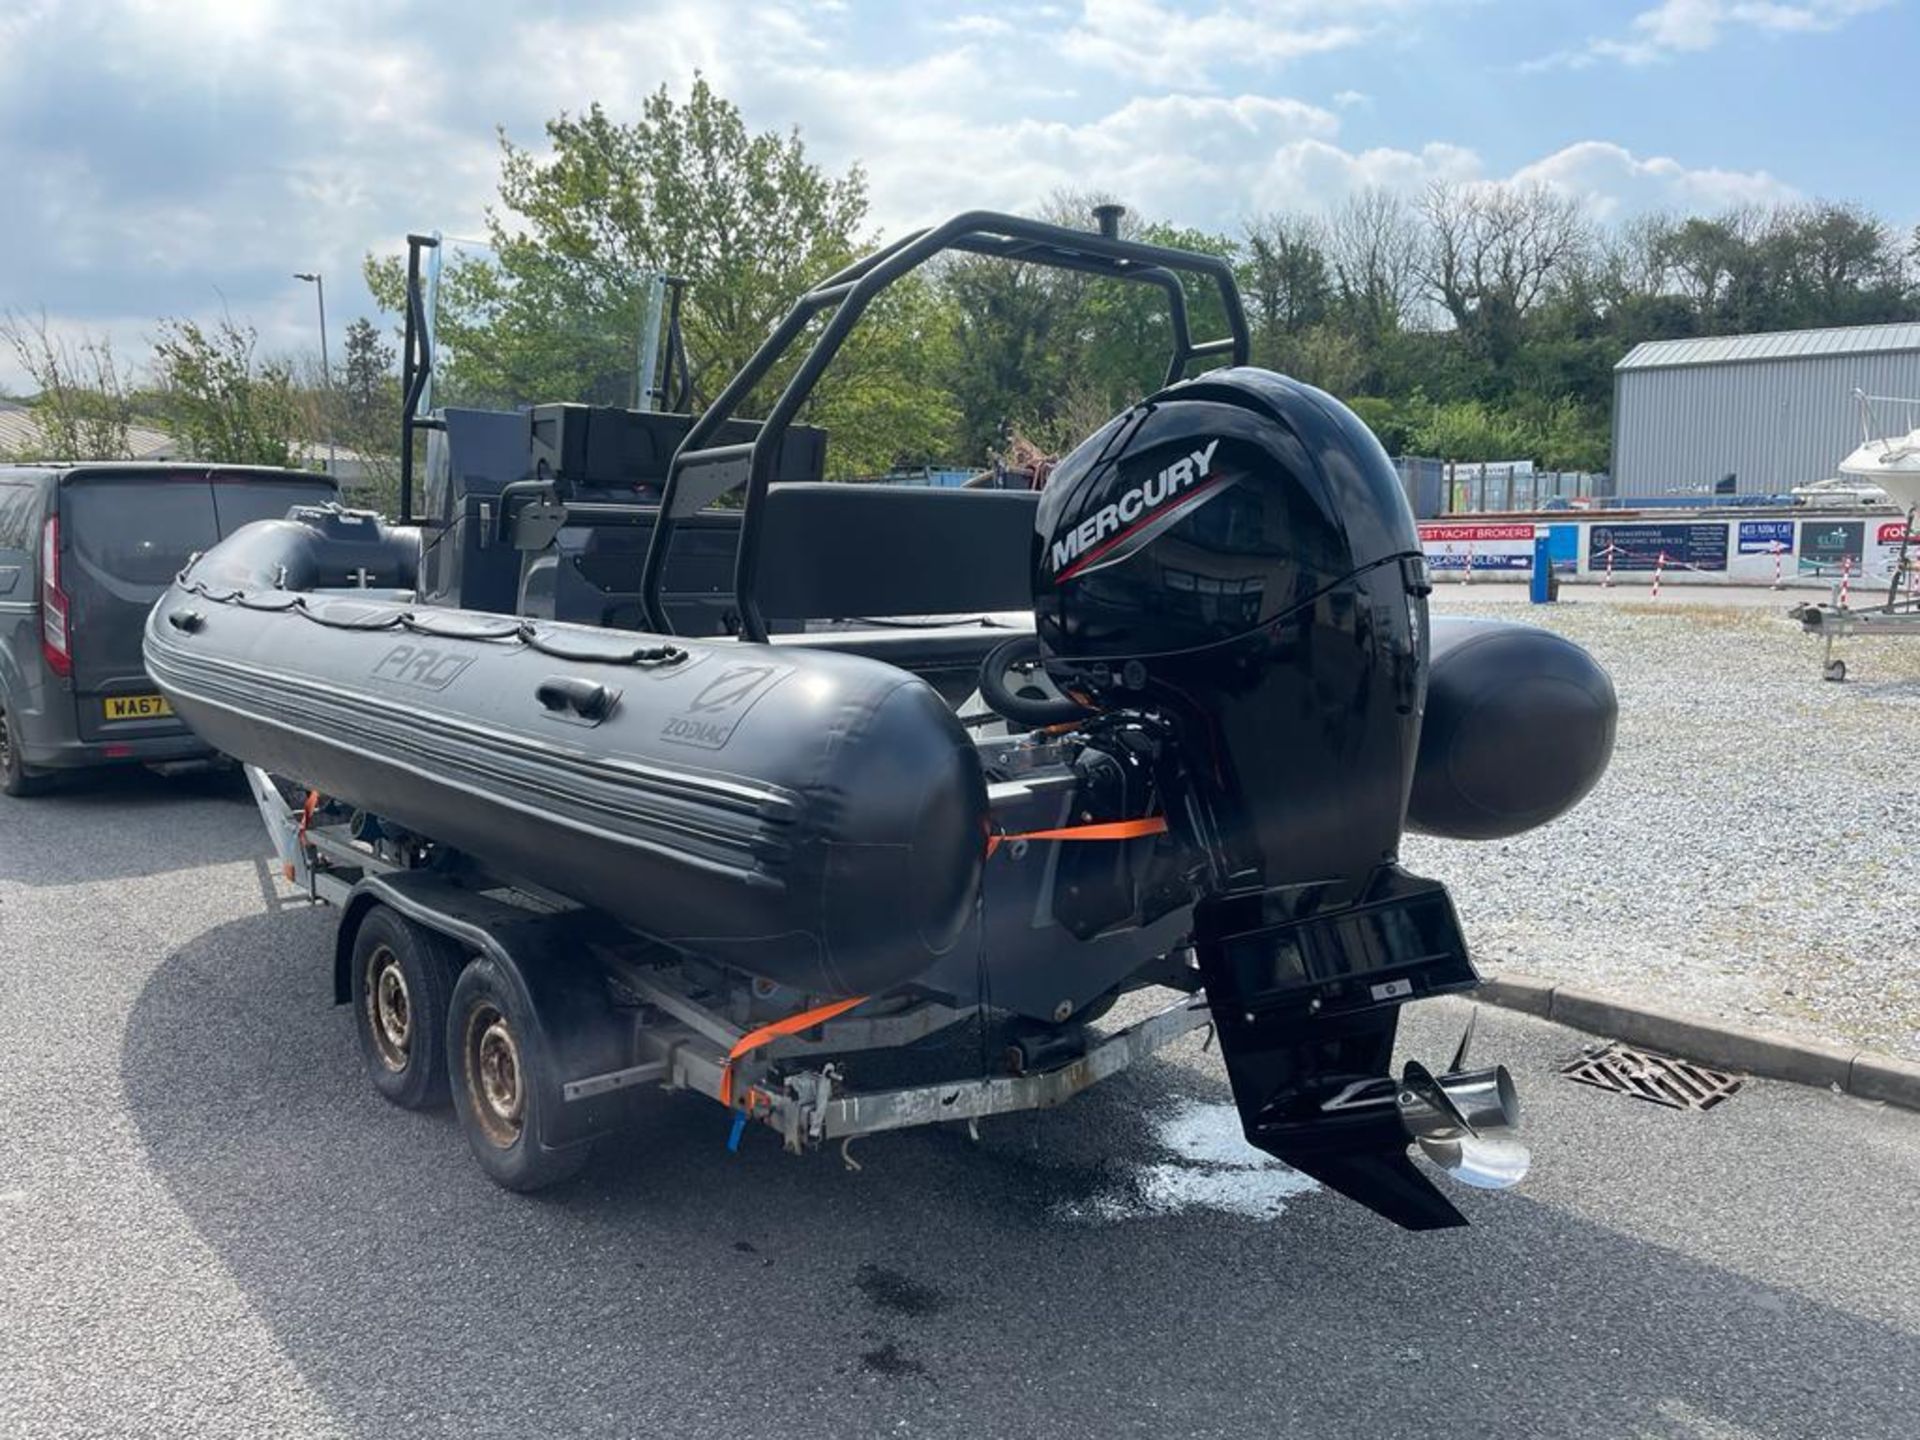 Zodiac 650 Pro rigid inflatable boat with Mercury 150 outboard engine. Includes road trailer. - Image 3 of 14